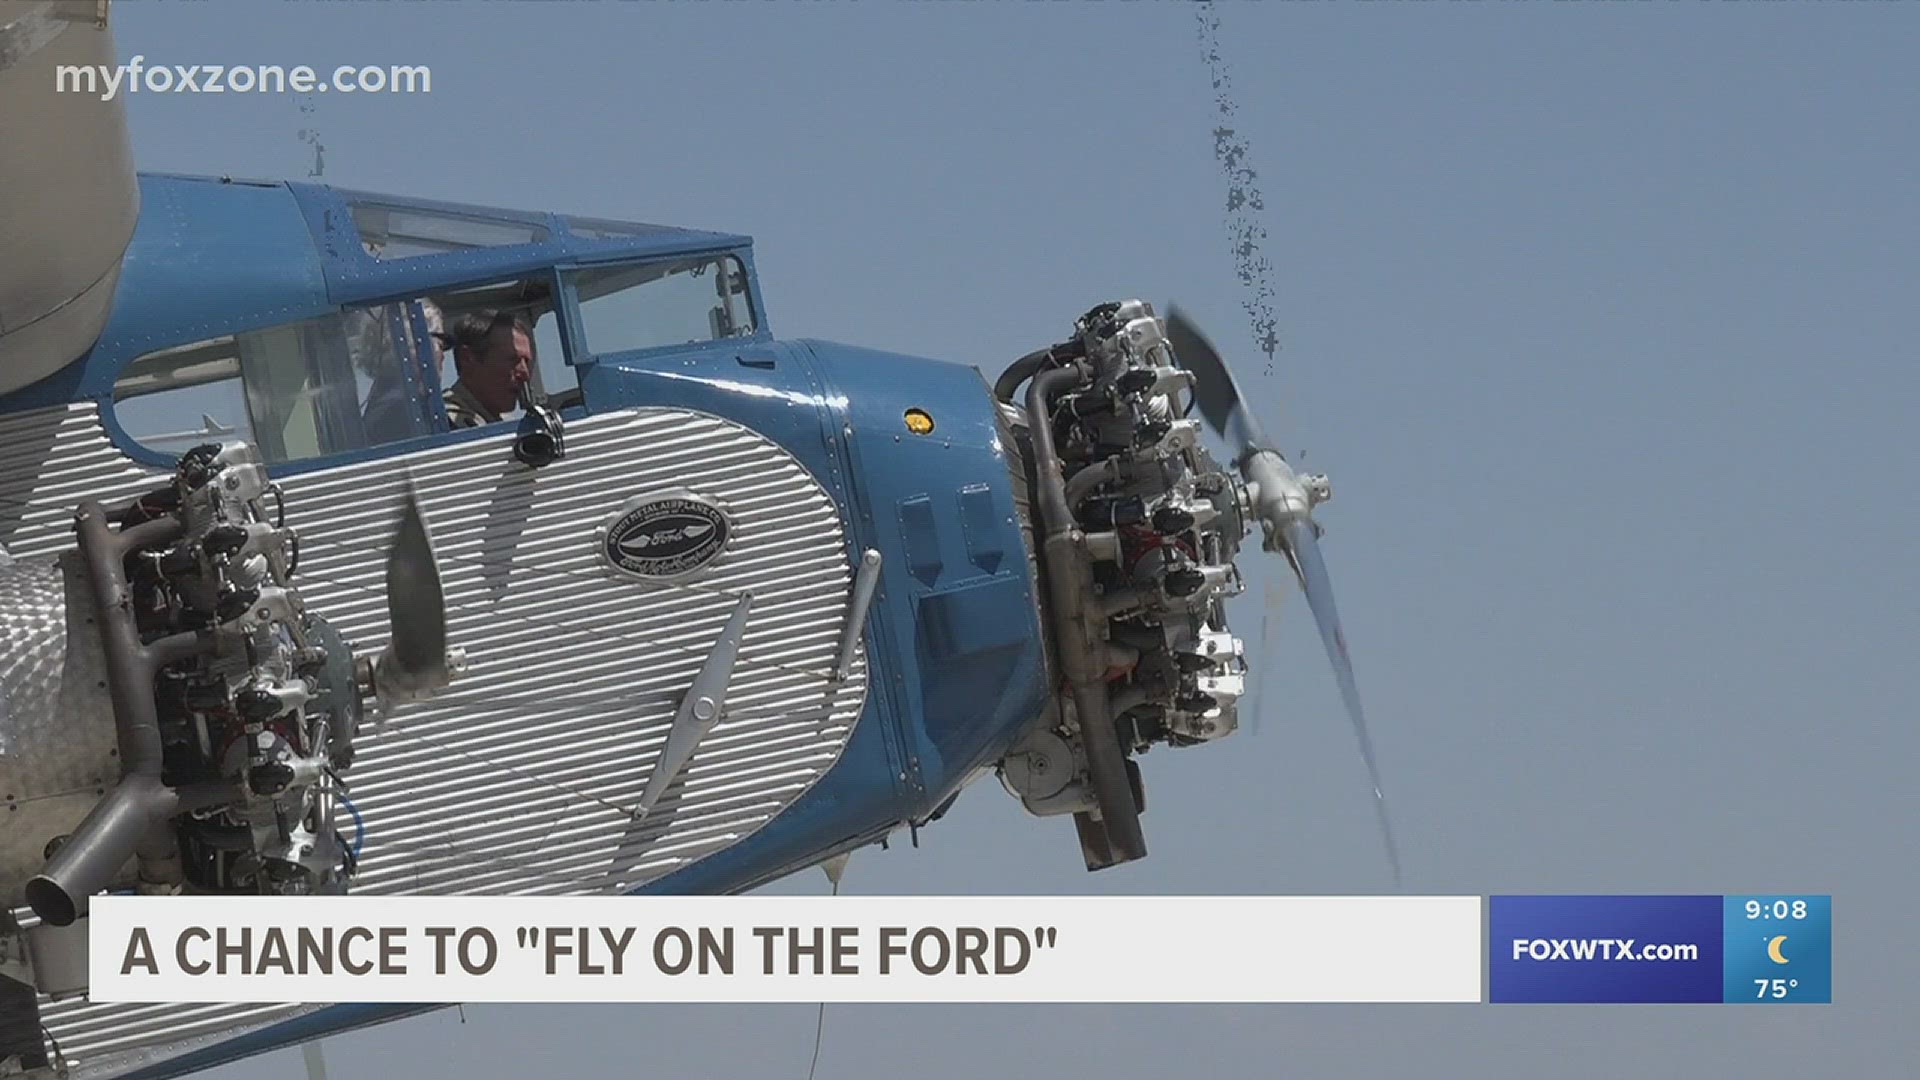 "Fly on the Ford" offers people a chance to step back in aviation history at San Angelo Regional Airport.